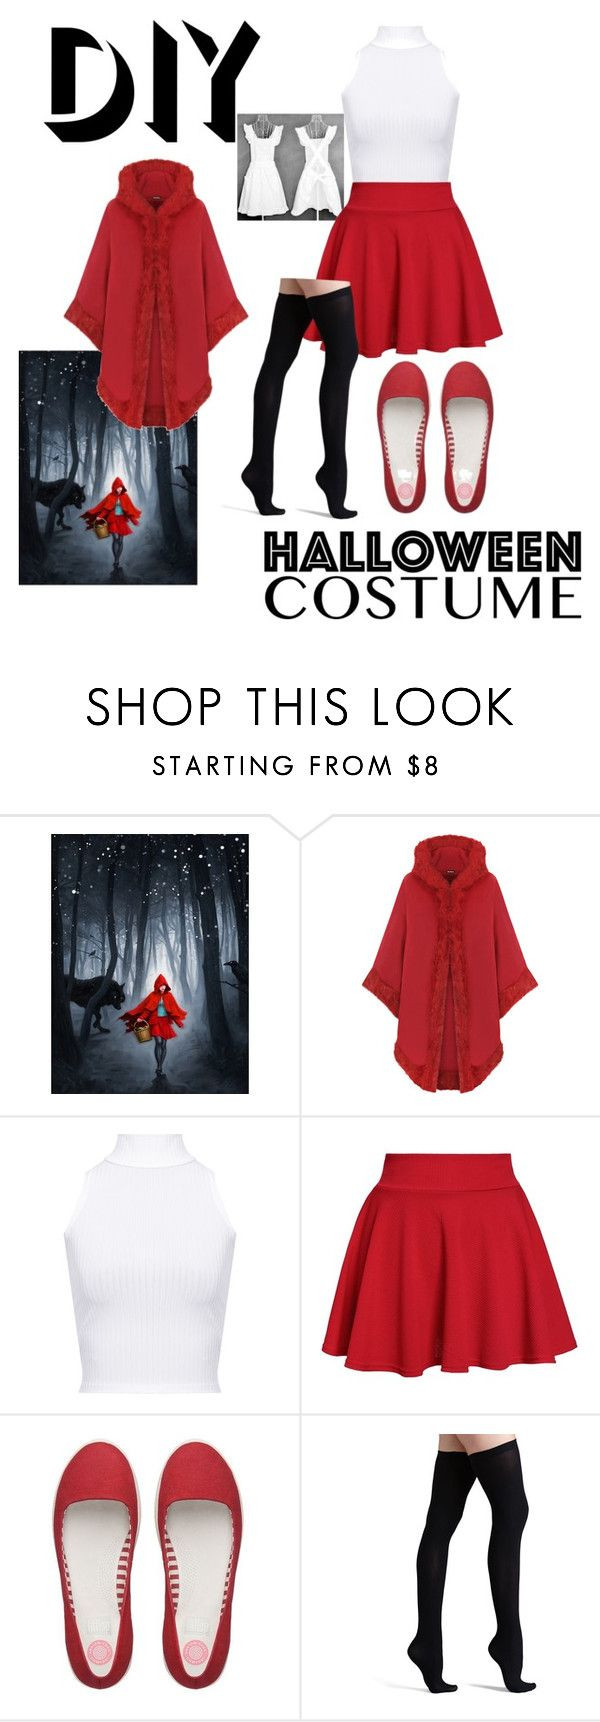 Red Riding Hood DIY Costume
 Diy little red riding hood costume